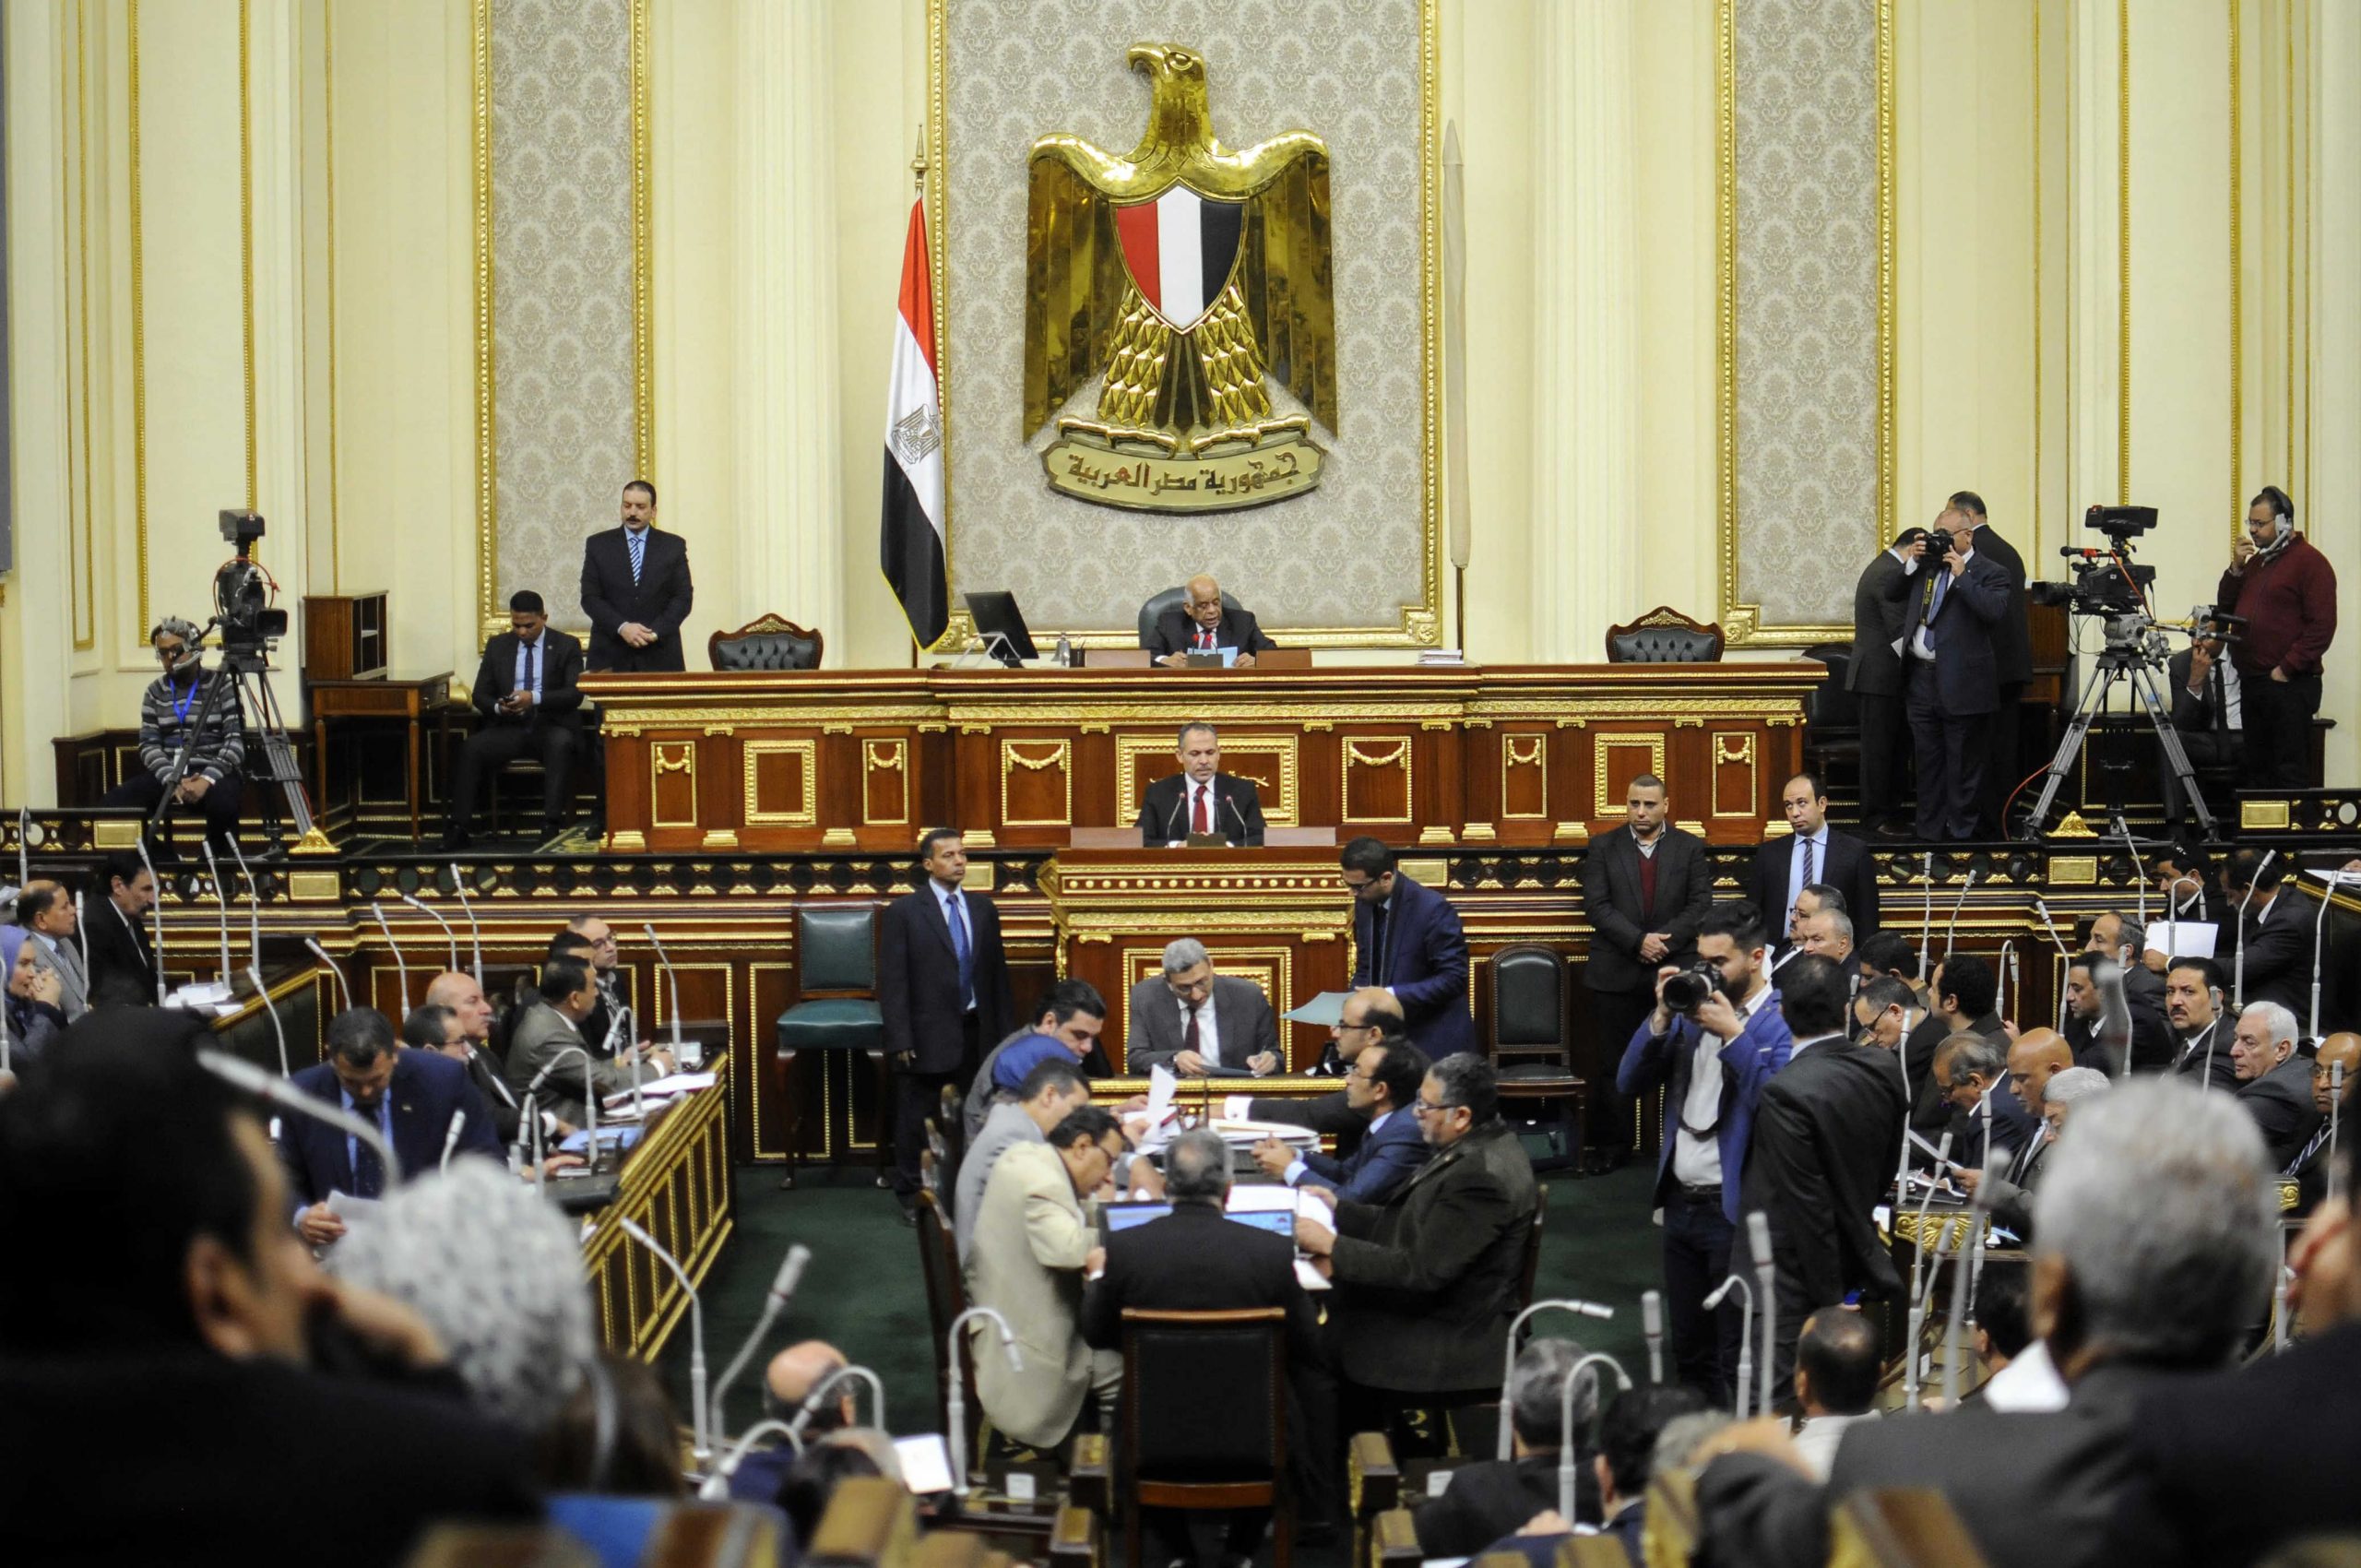 A picture taken on February 13, 2019 shows members of the Egyptian parliament attending a plenary session held to deliberate the proposed constitutional amendments that will increase the country's President term in office from four to six years, in the capital Cairo. (Photo by STRINGER / AFP)